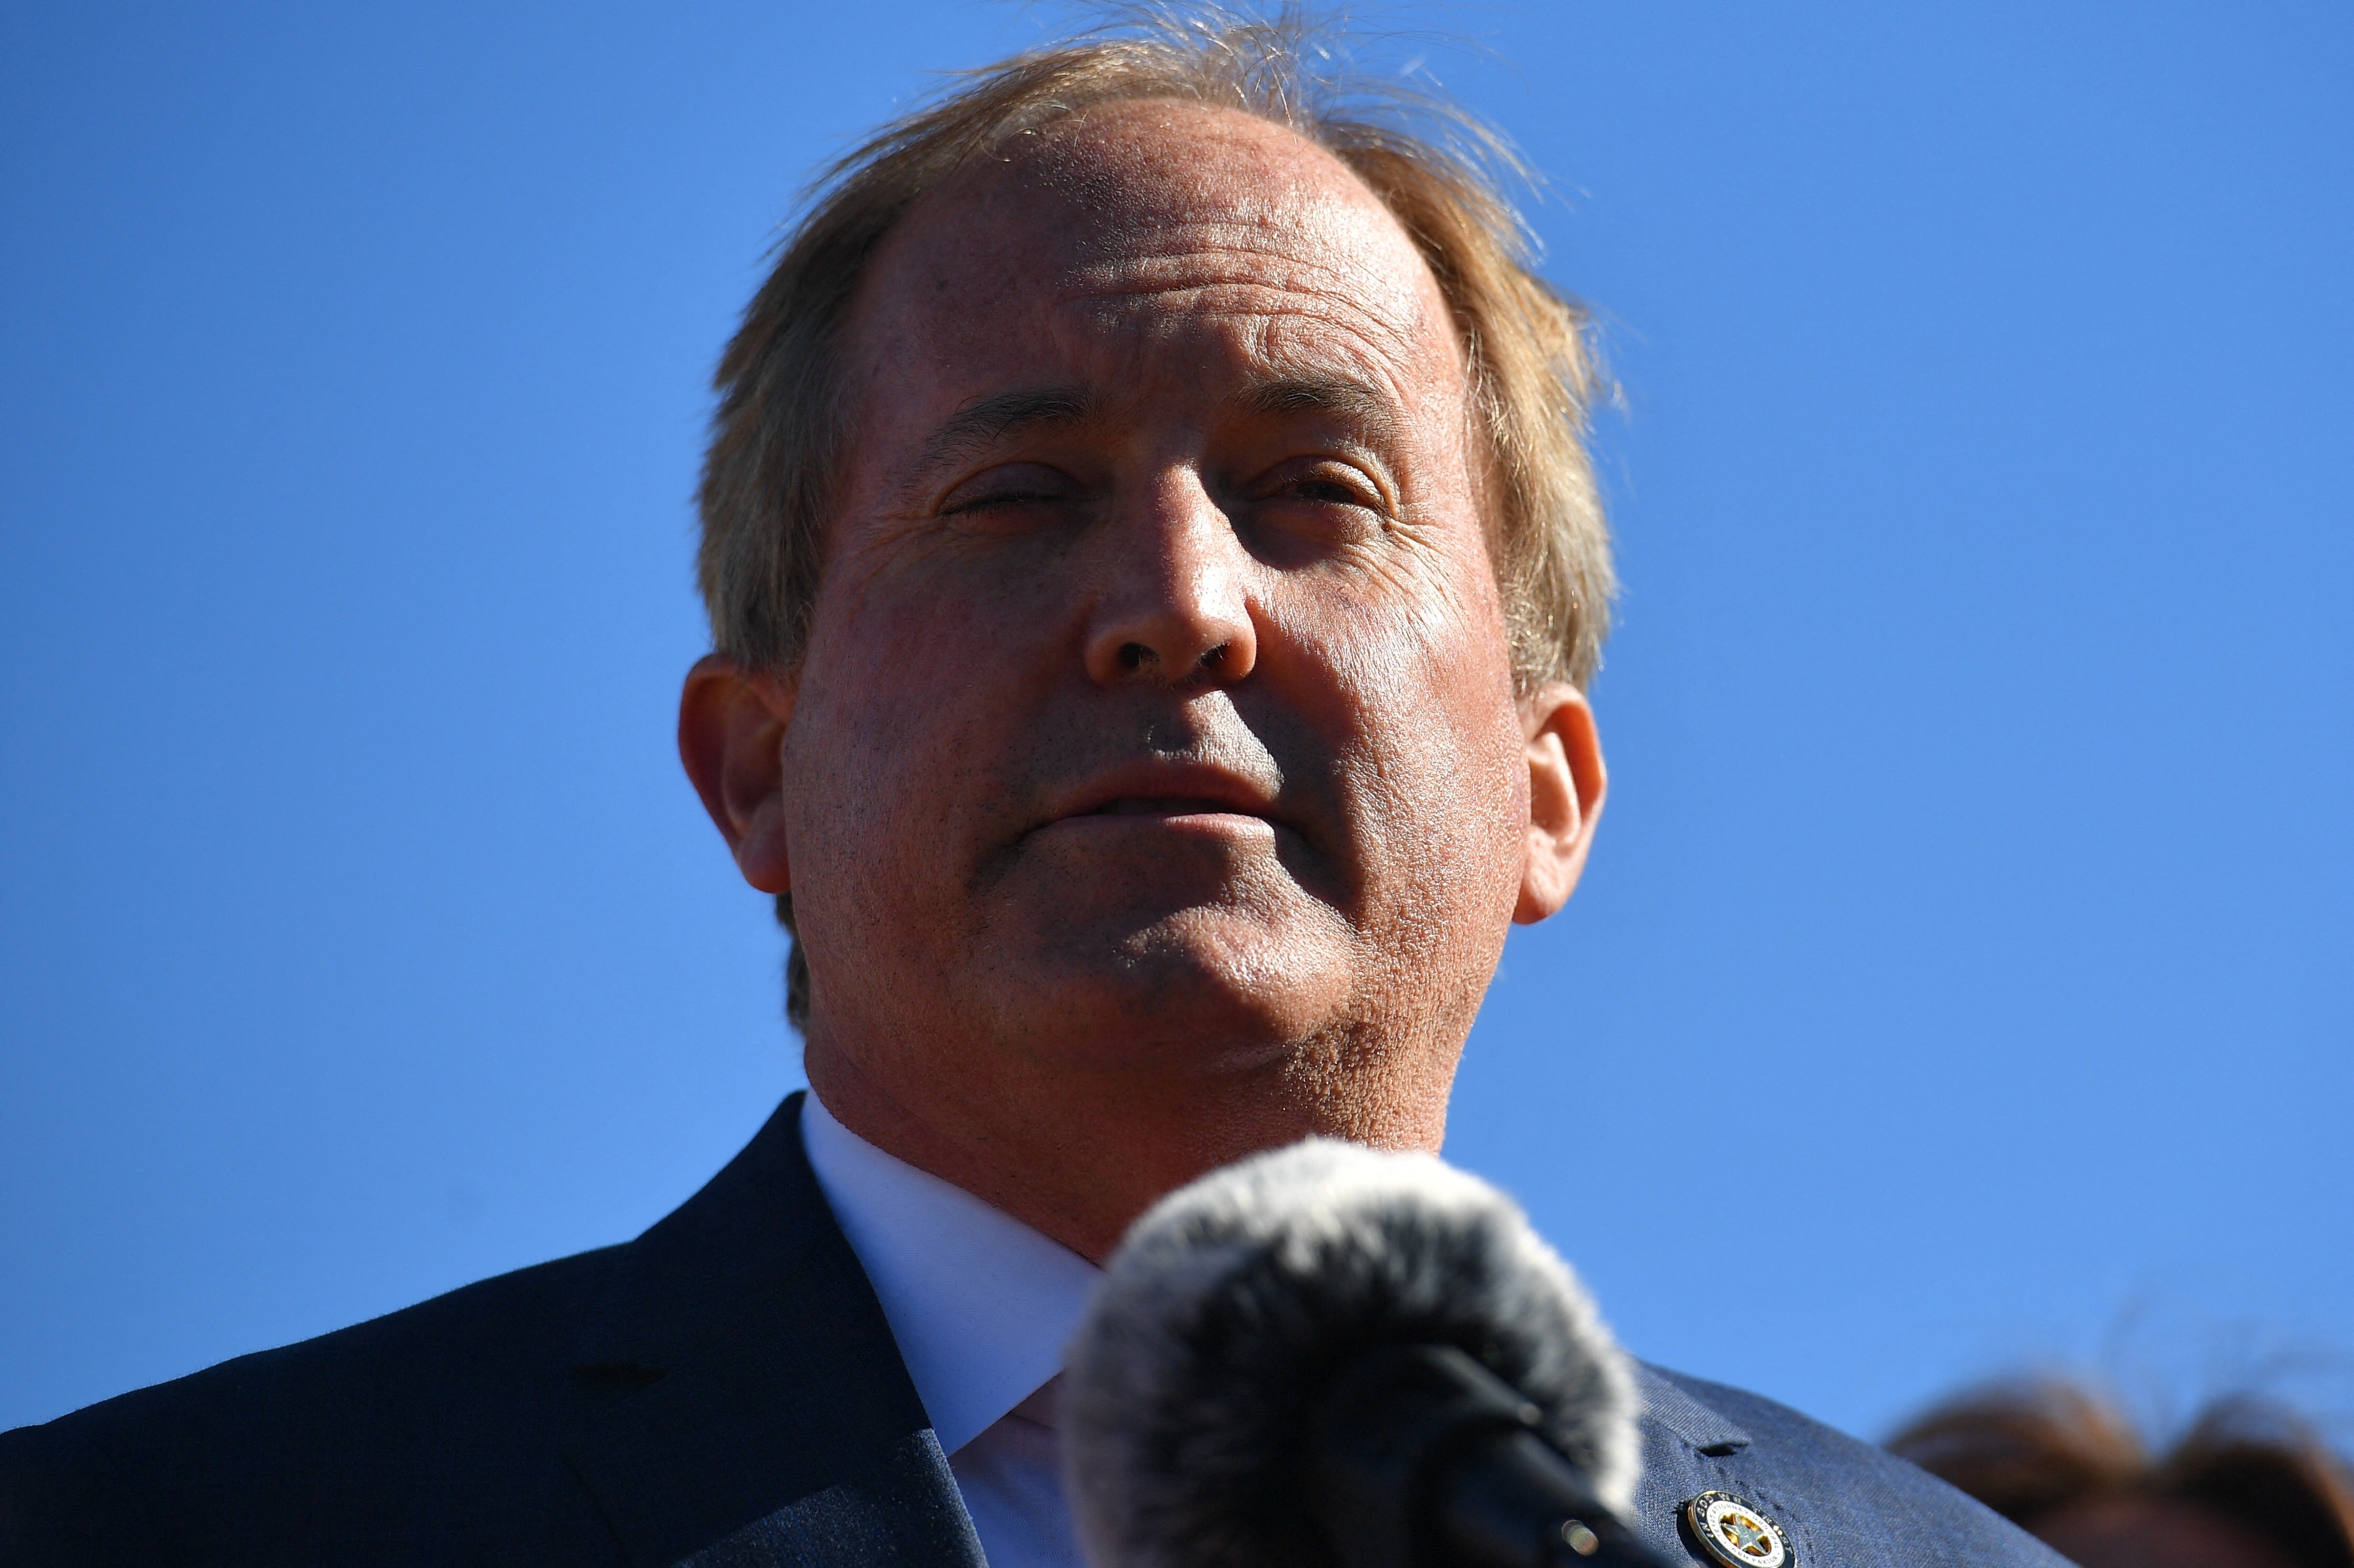 Texas Attorney General Ken Paxton says a school district’s Pride celebration violates state law